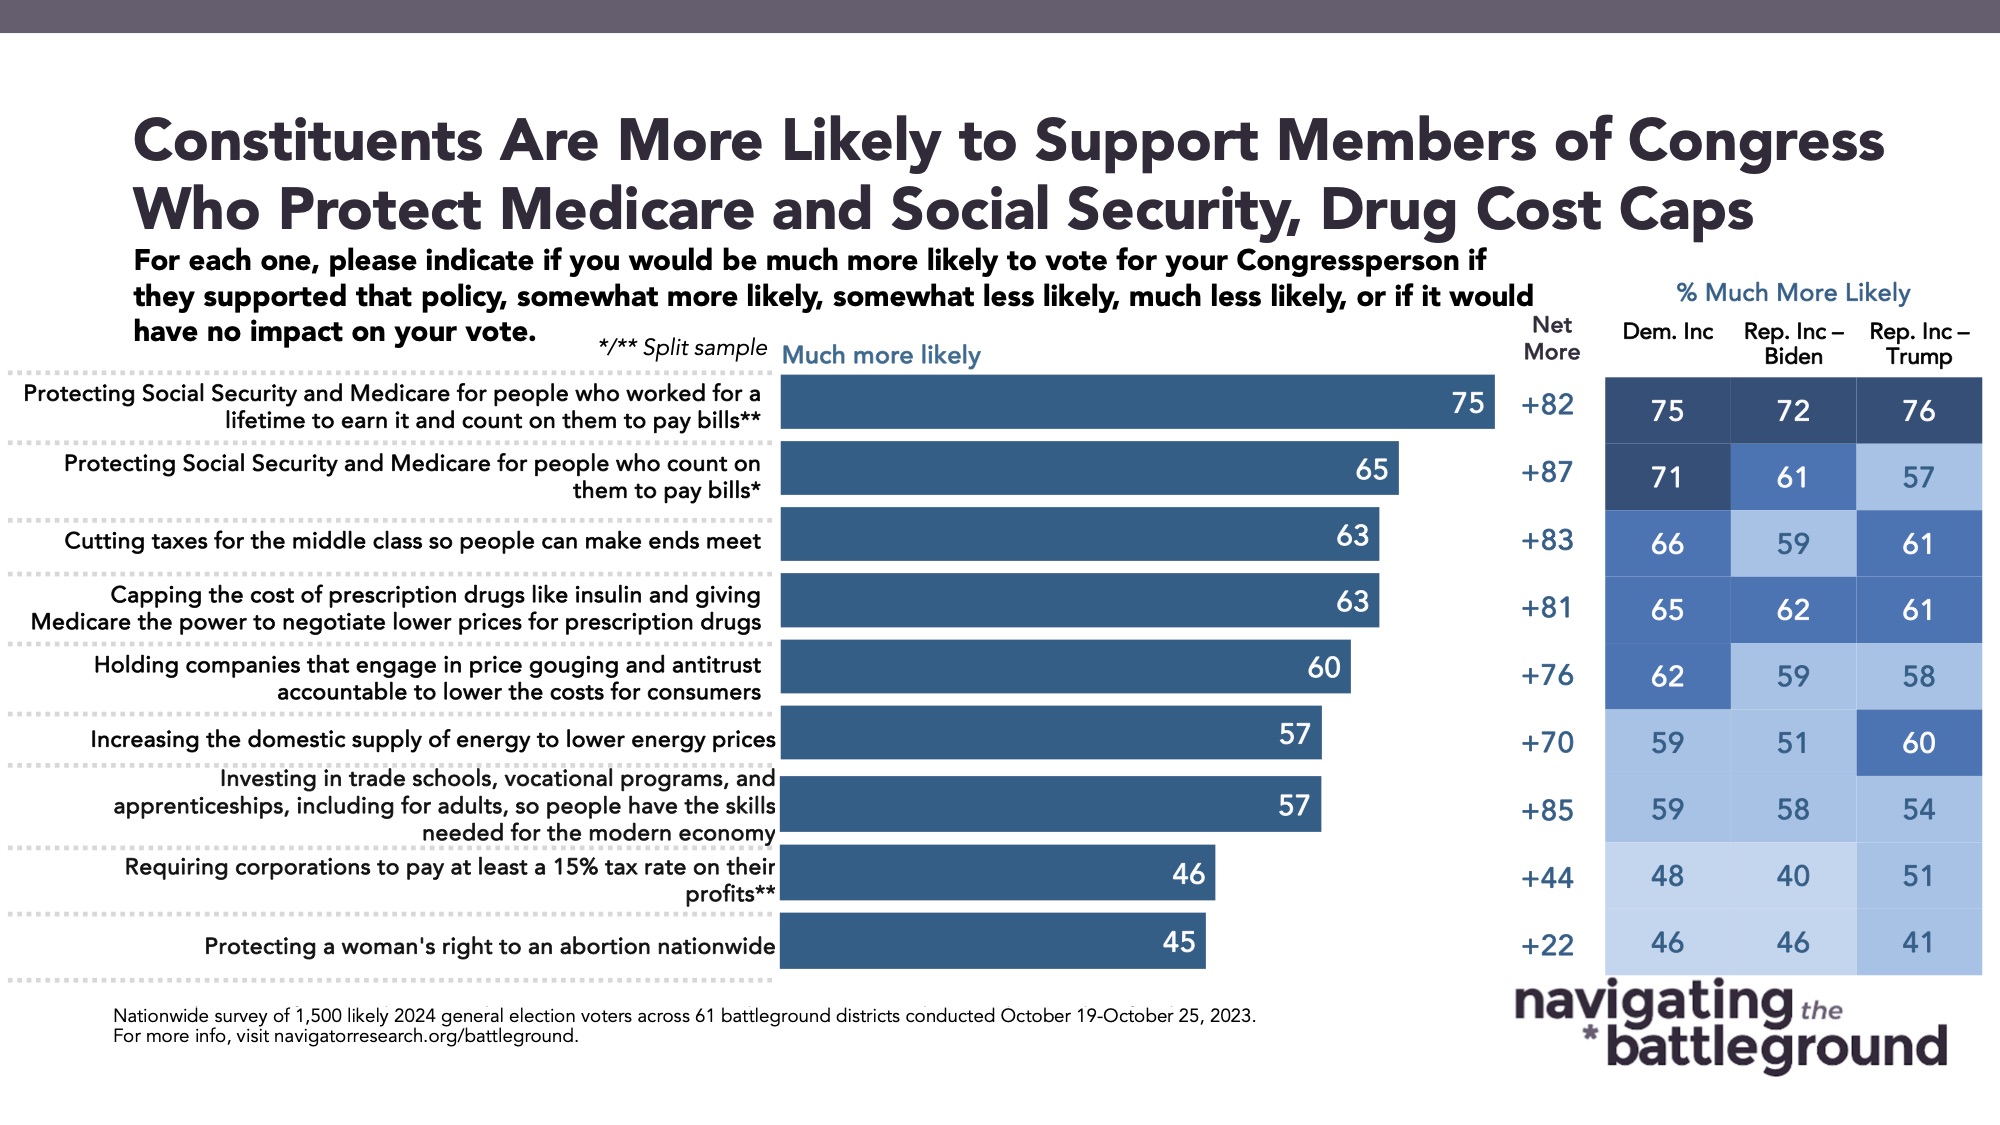 Bar graph of polling data from Navigating the Battleground. Title: Constituents Are More Likely to Support Members of Congress Who Protect Medicare and Social Security, Drug Cost Caps